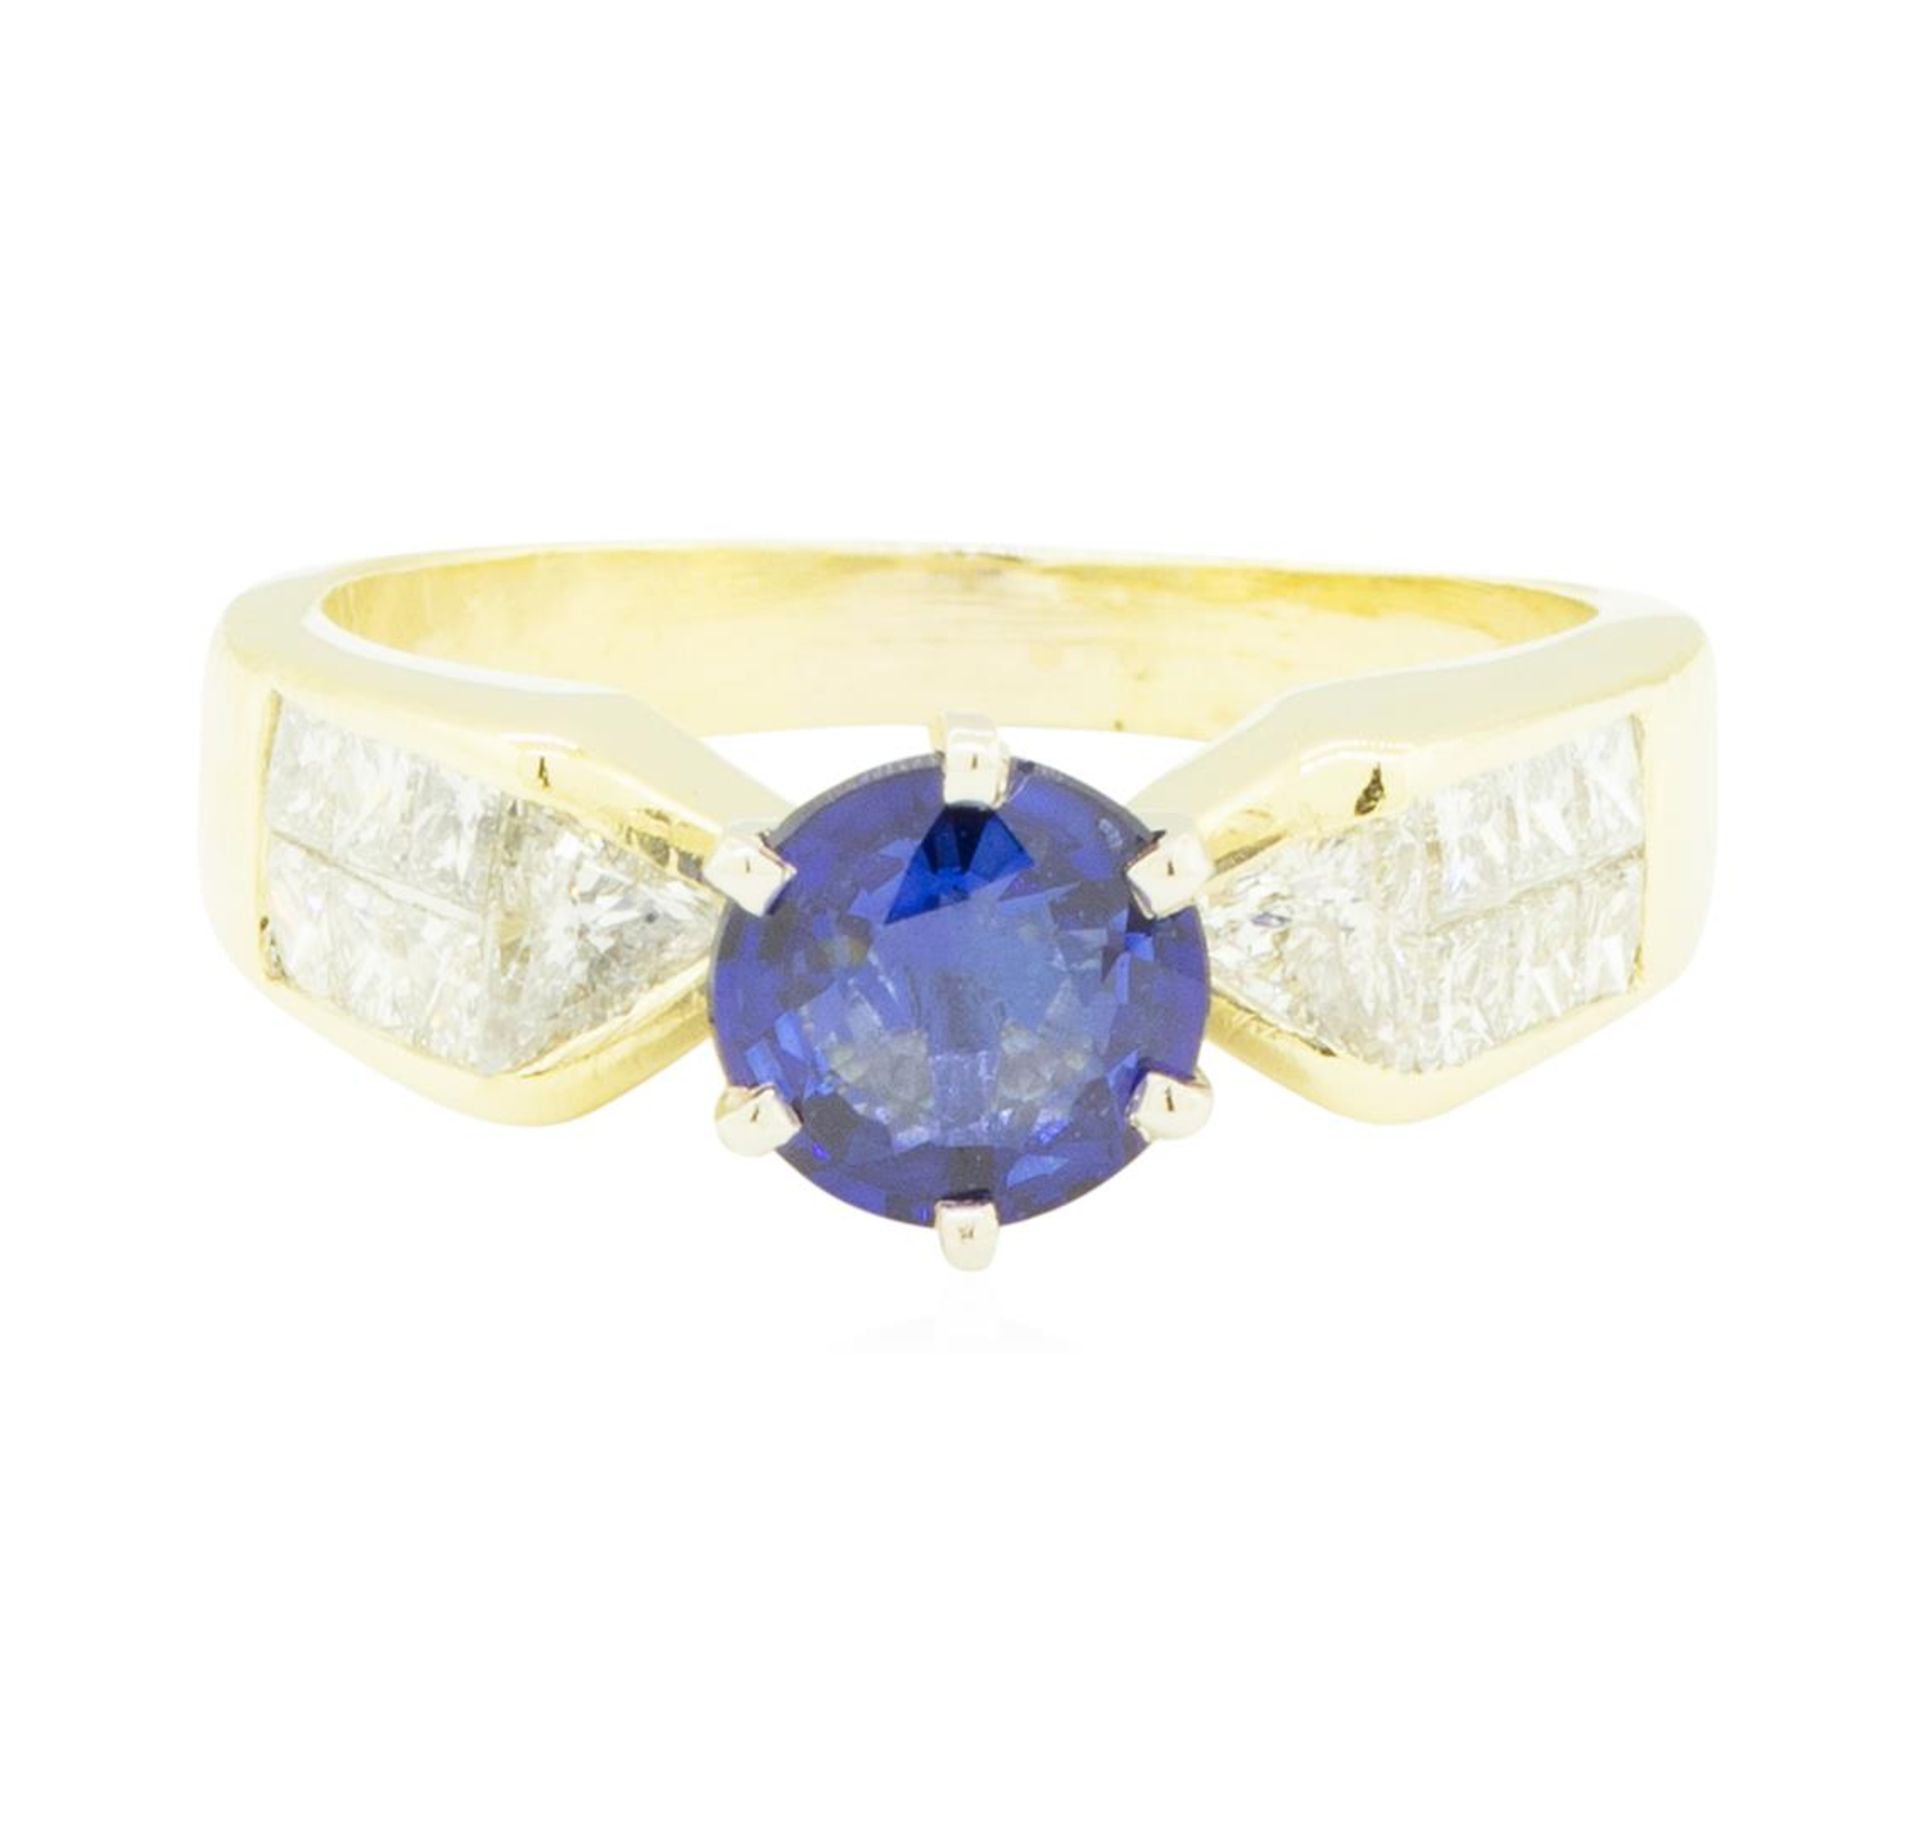 2.20 ctw Blue Sapphire and Diamond Ring - 18KT Yellow Gold - Image 2 of 4